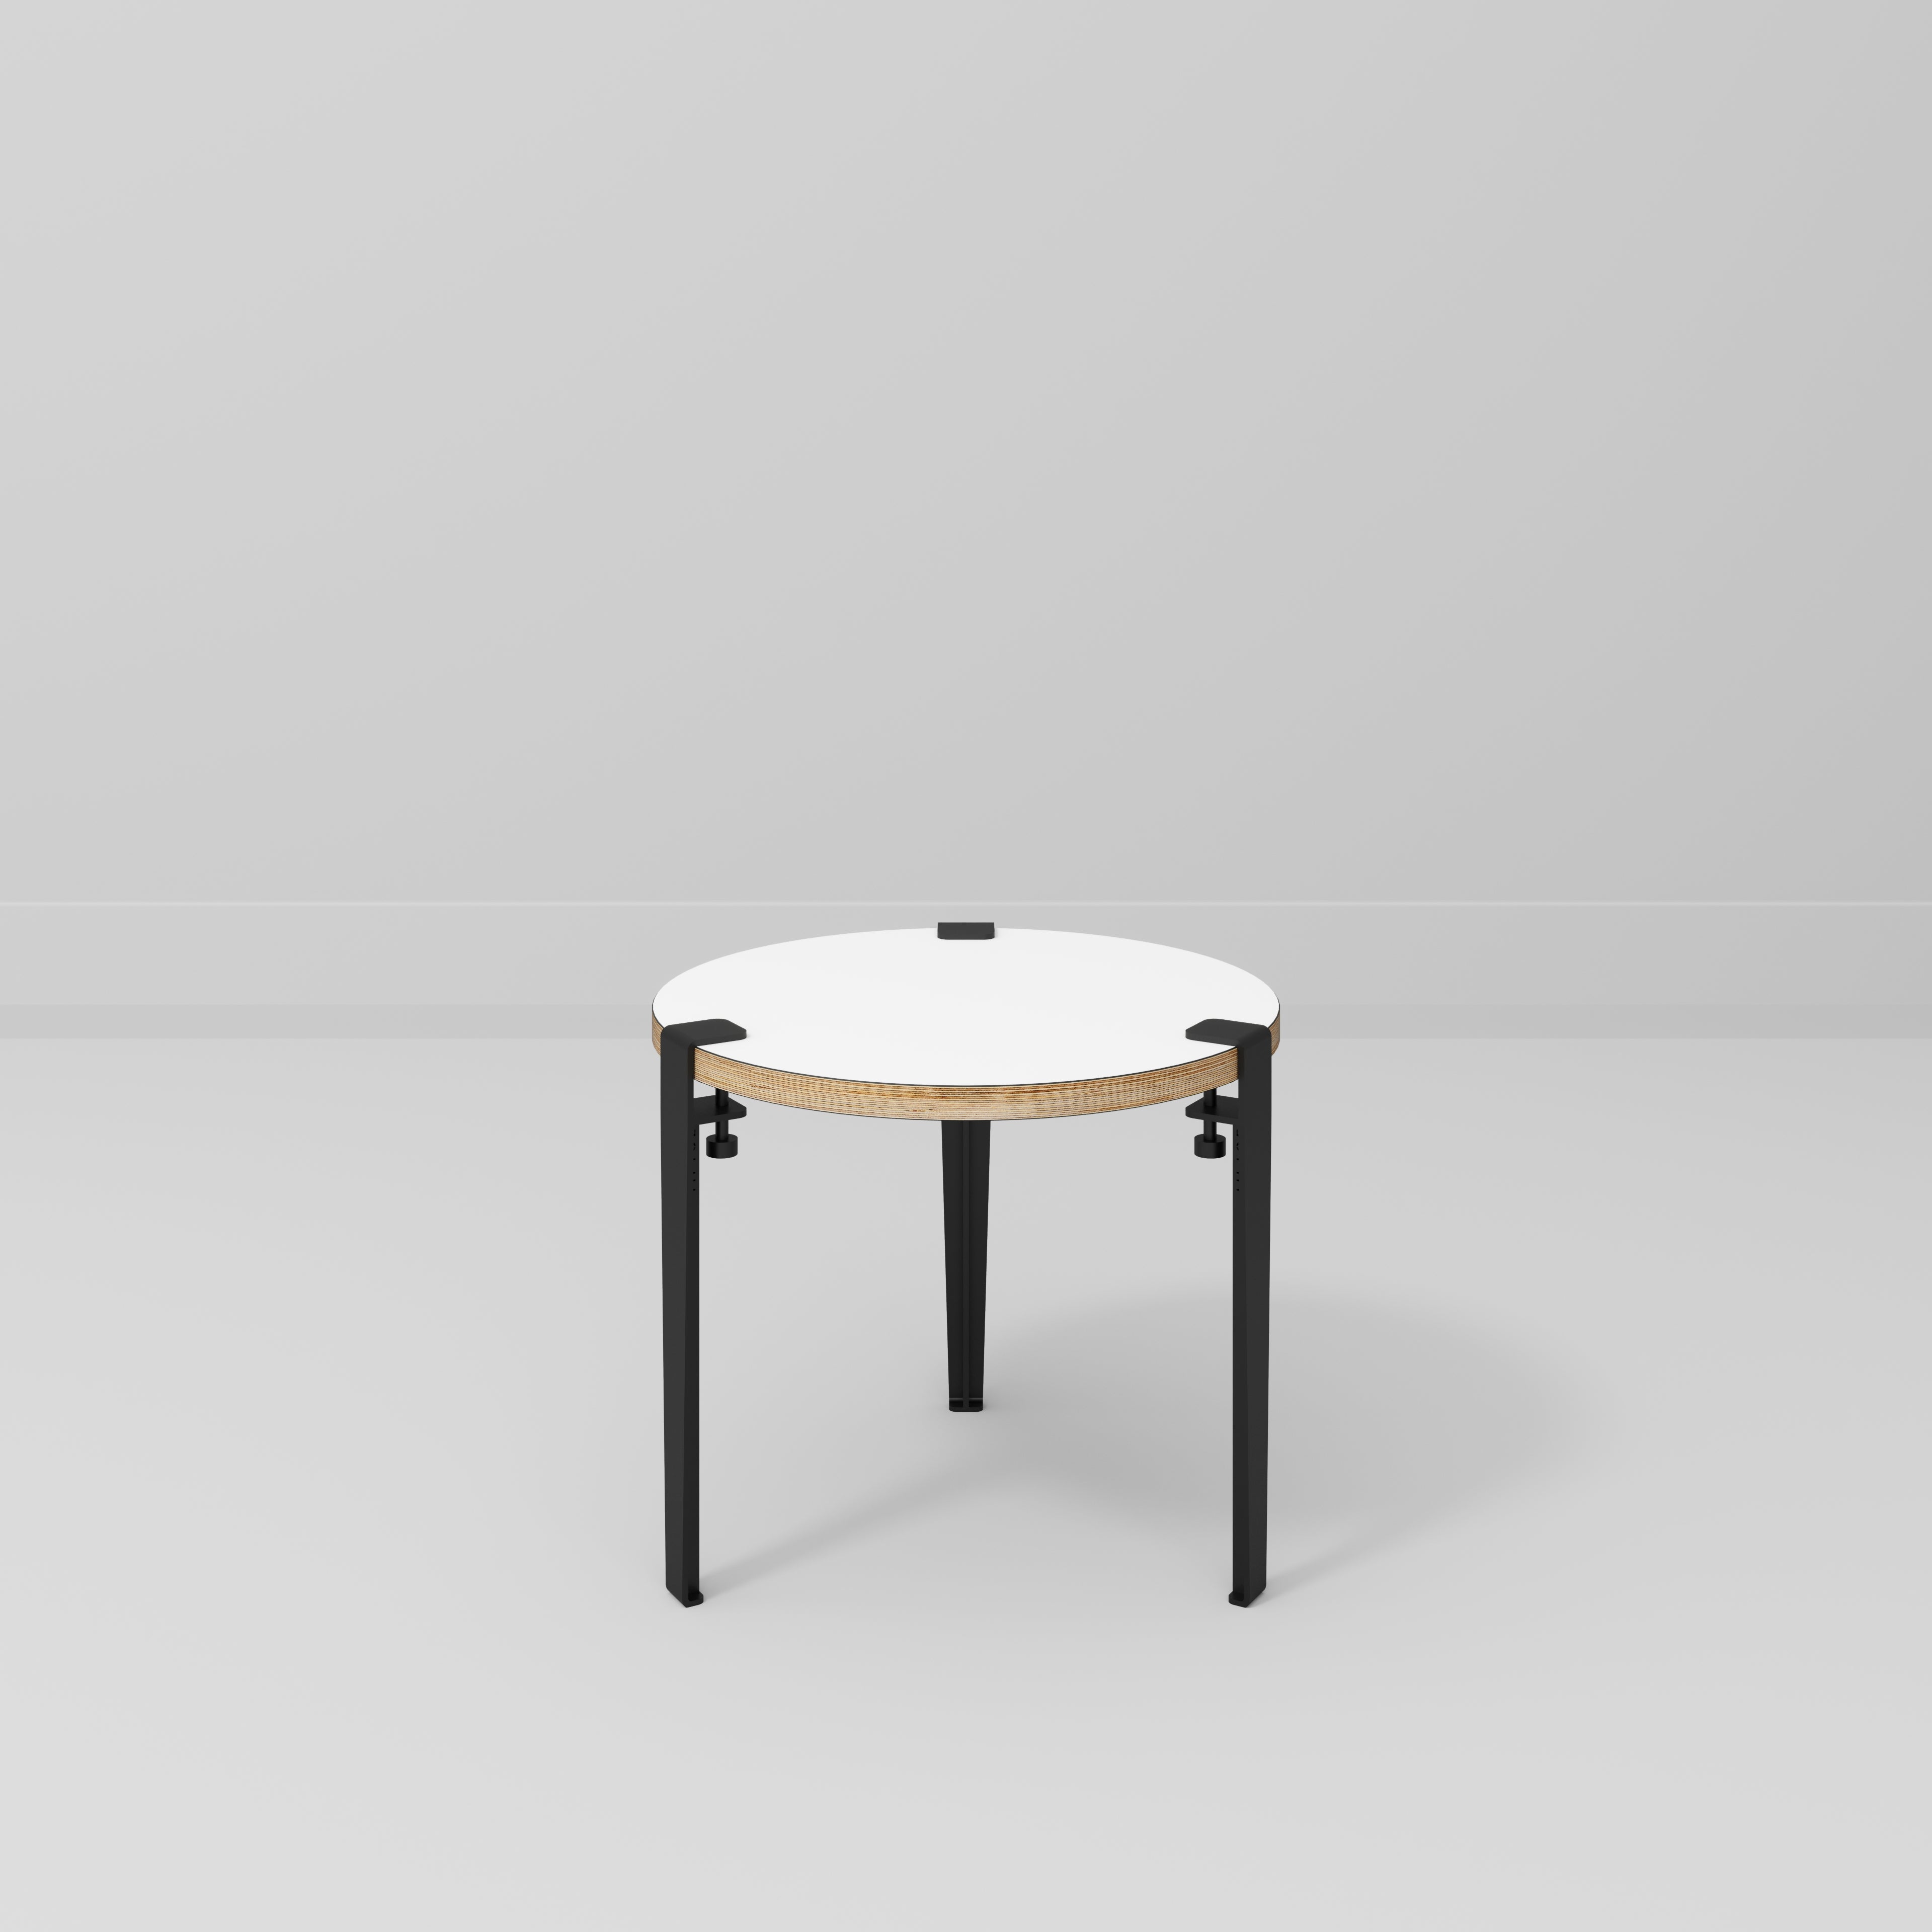 Round Side Table with Black Tiptoe Legs - Formica White - 500(dia) x 430(h)